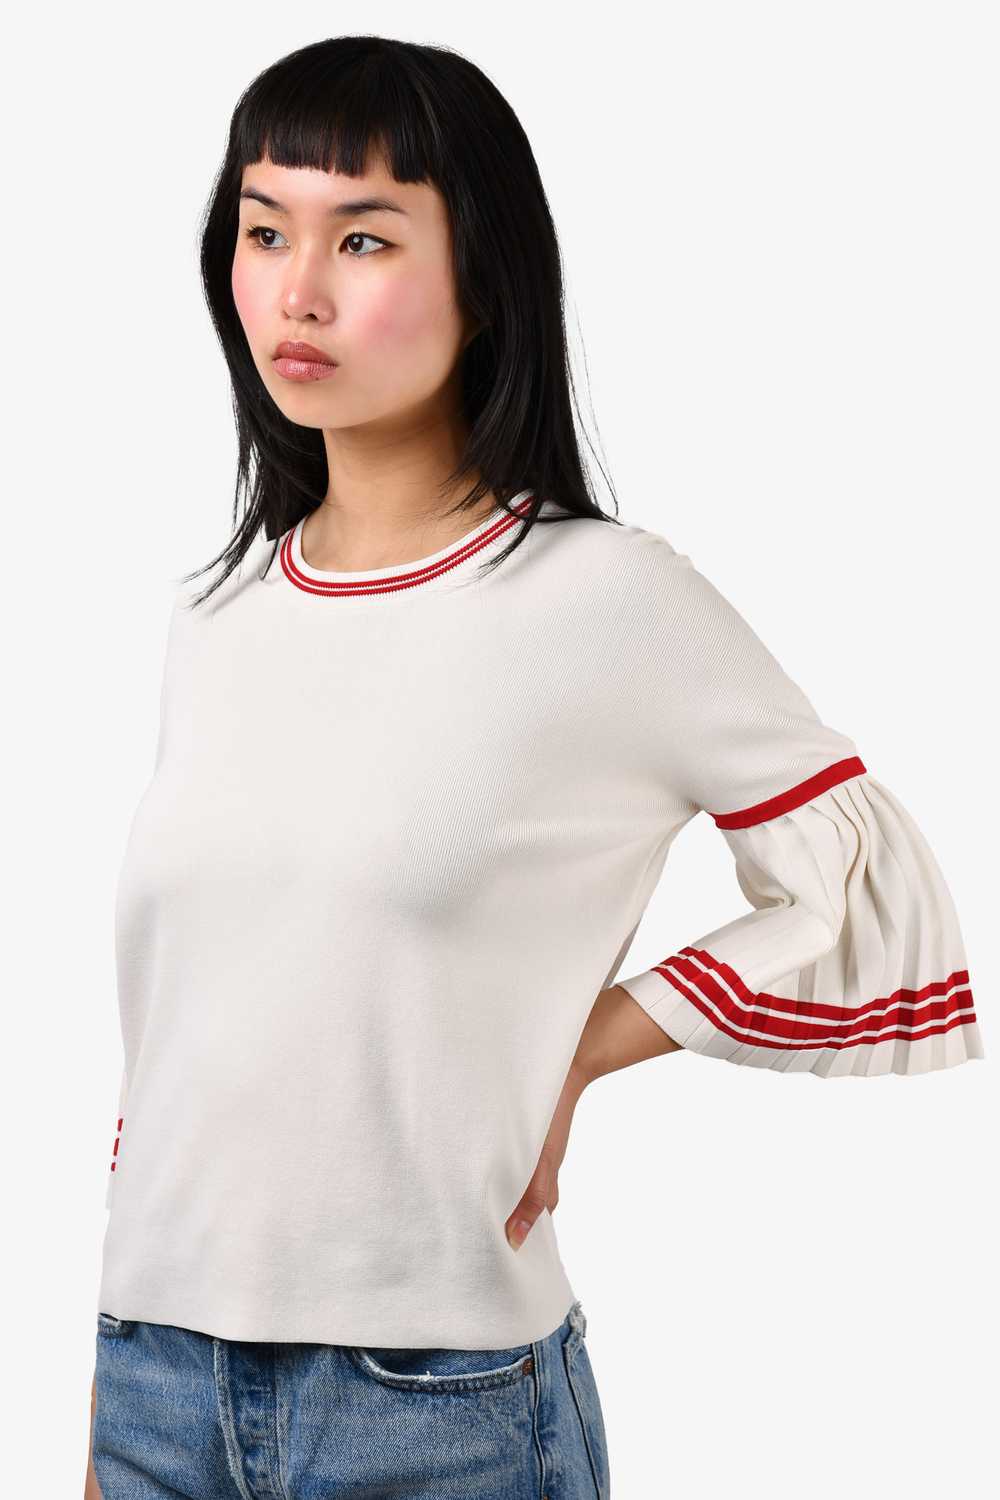 Maje White and Red Knit Pleated Sleeve Top Size 1 - image 2